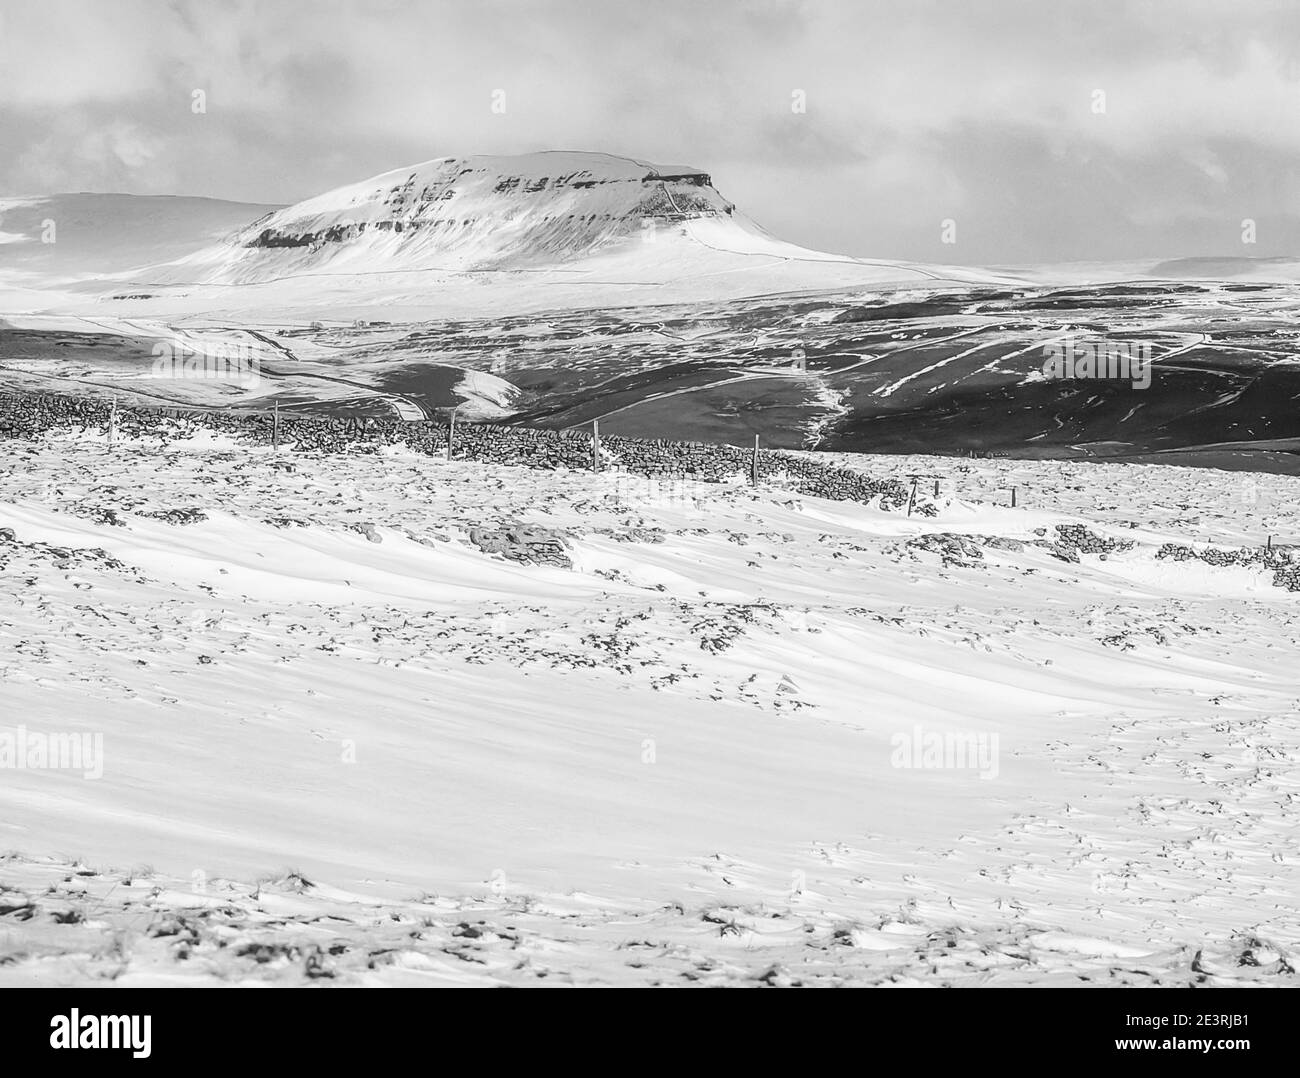 England.Fabulous winter scenery in monochrome of Penyghent one of the famous Yorkshire Dales Three Peaks Stock Photo